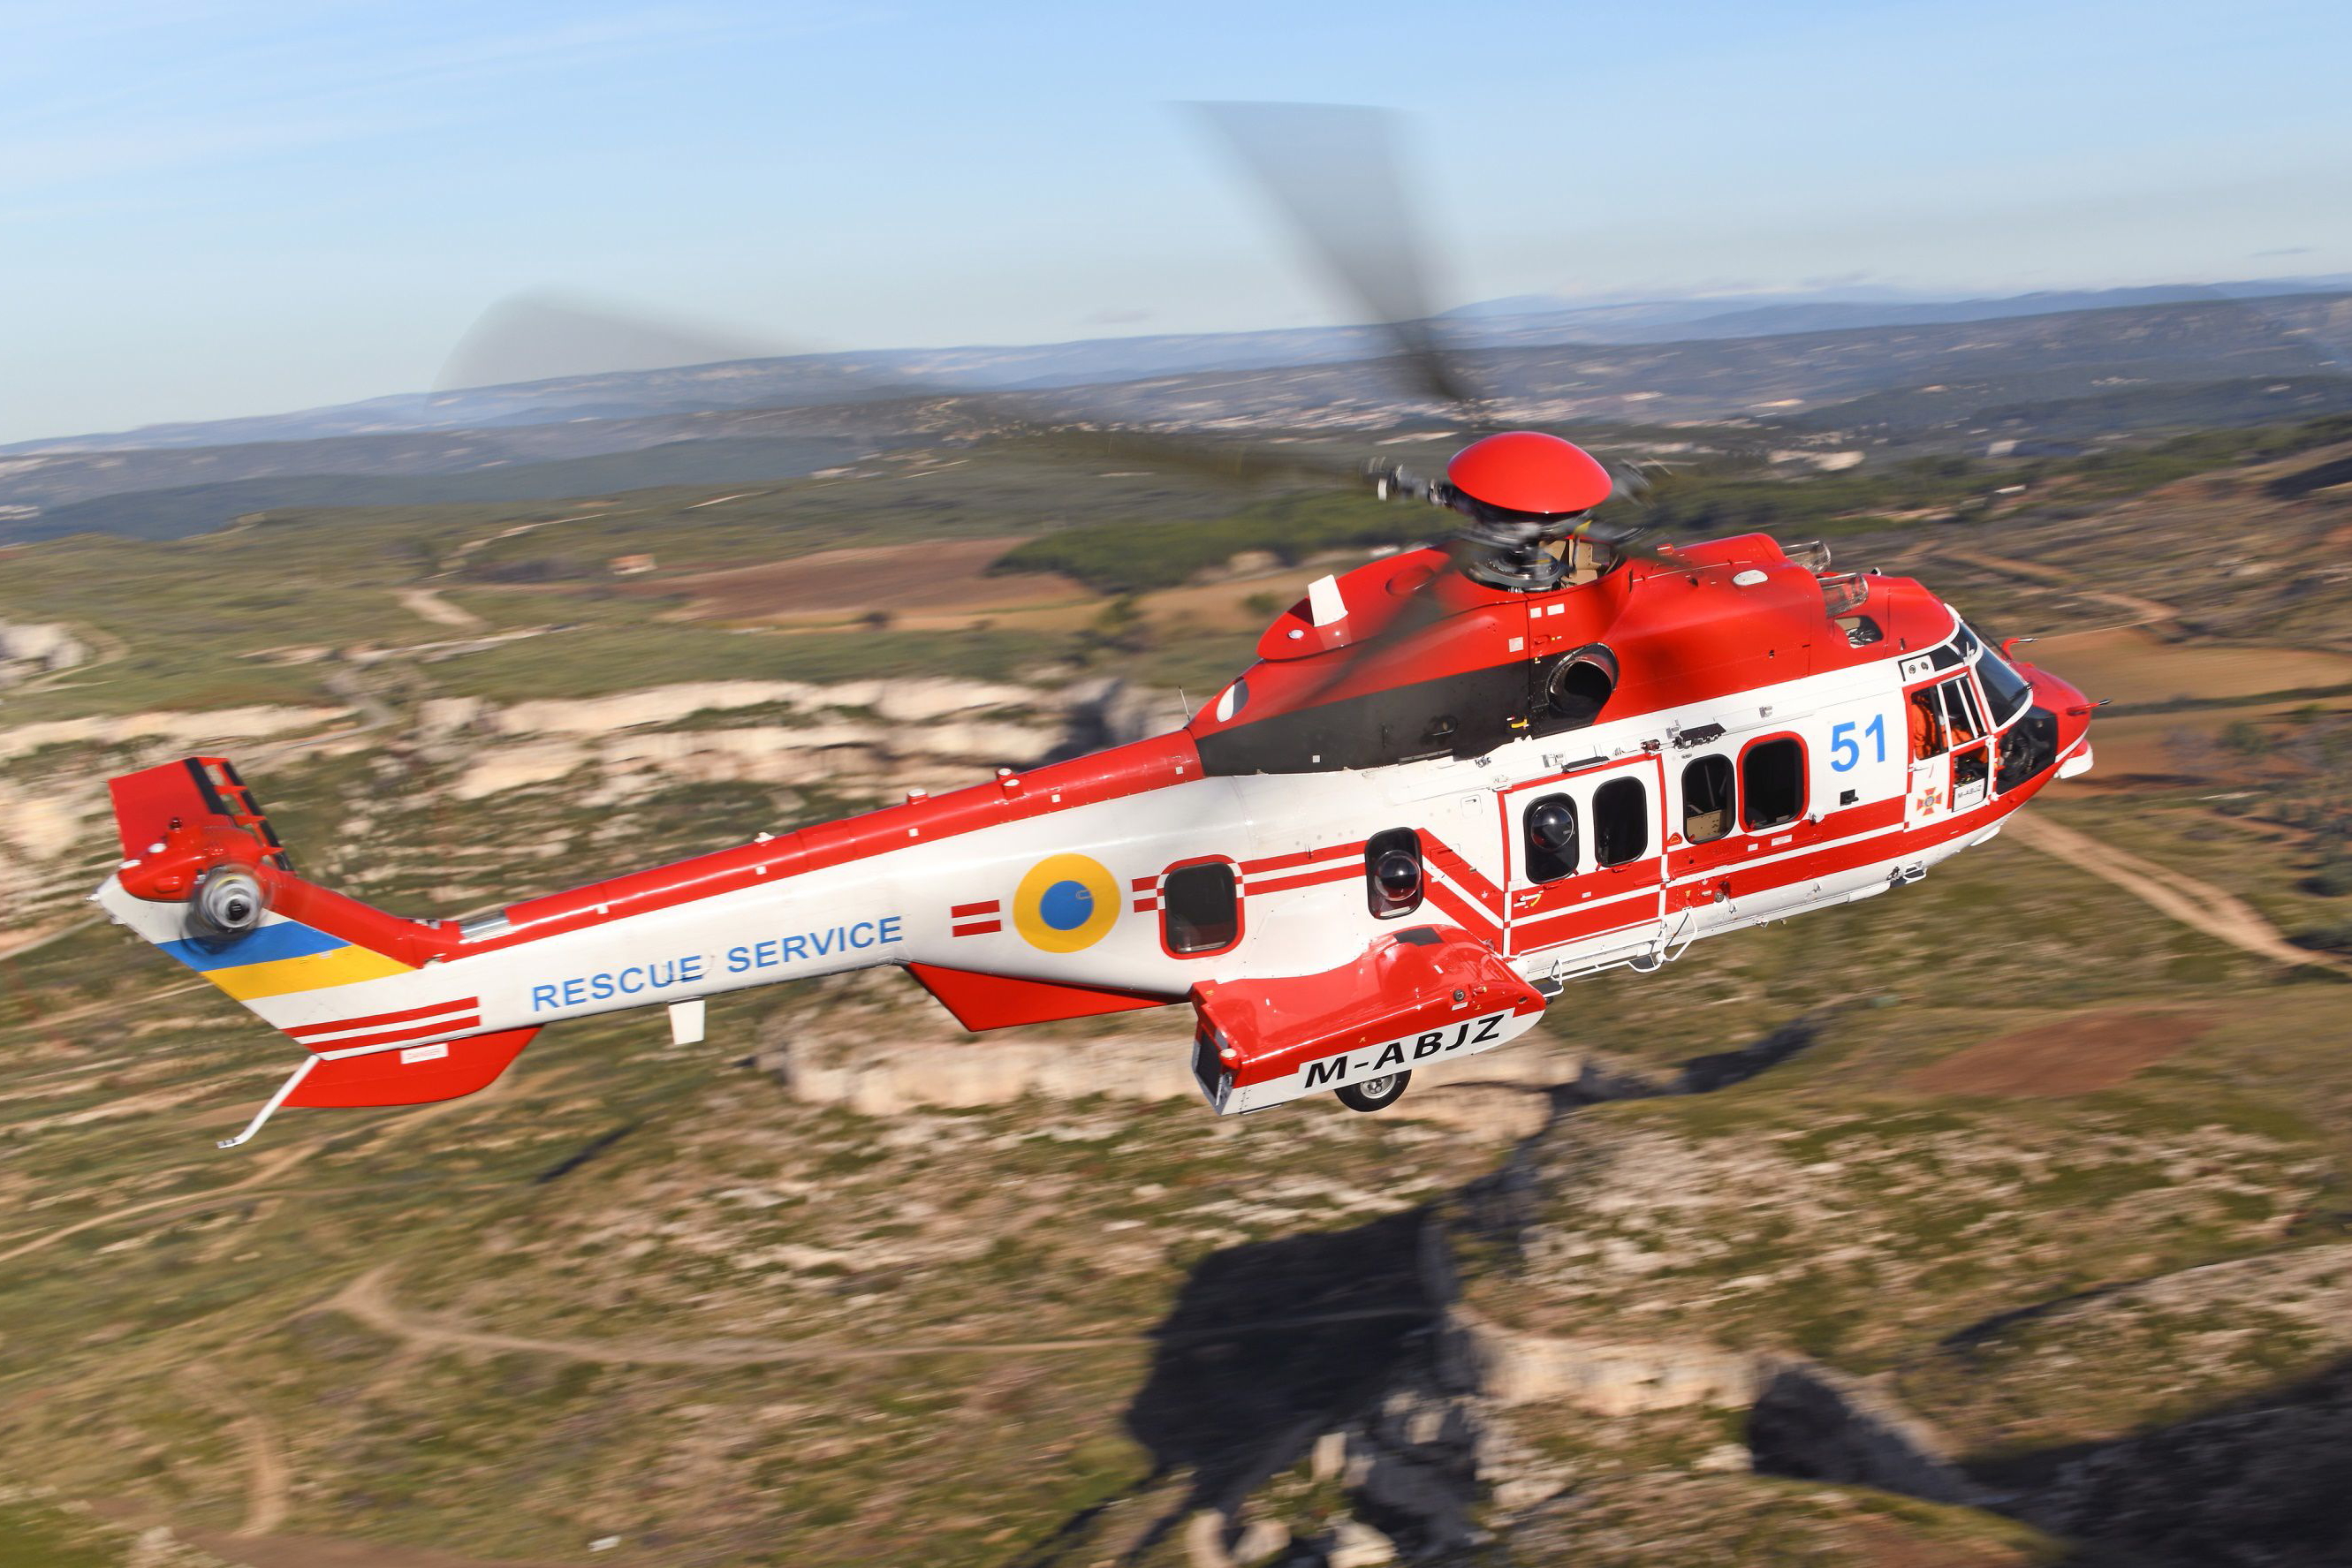 Airbus Helicopters has delivered the first two H225s, out of an order for 21 aircraft, to the Ukrainian Ministry of Interior. One aircraft is destined for search and rescue missions and the other one will be operated by the National Guard for law enforcement missions. Click to enlarge.